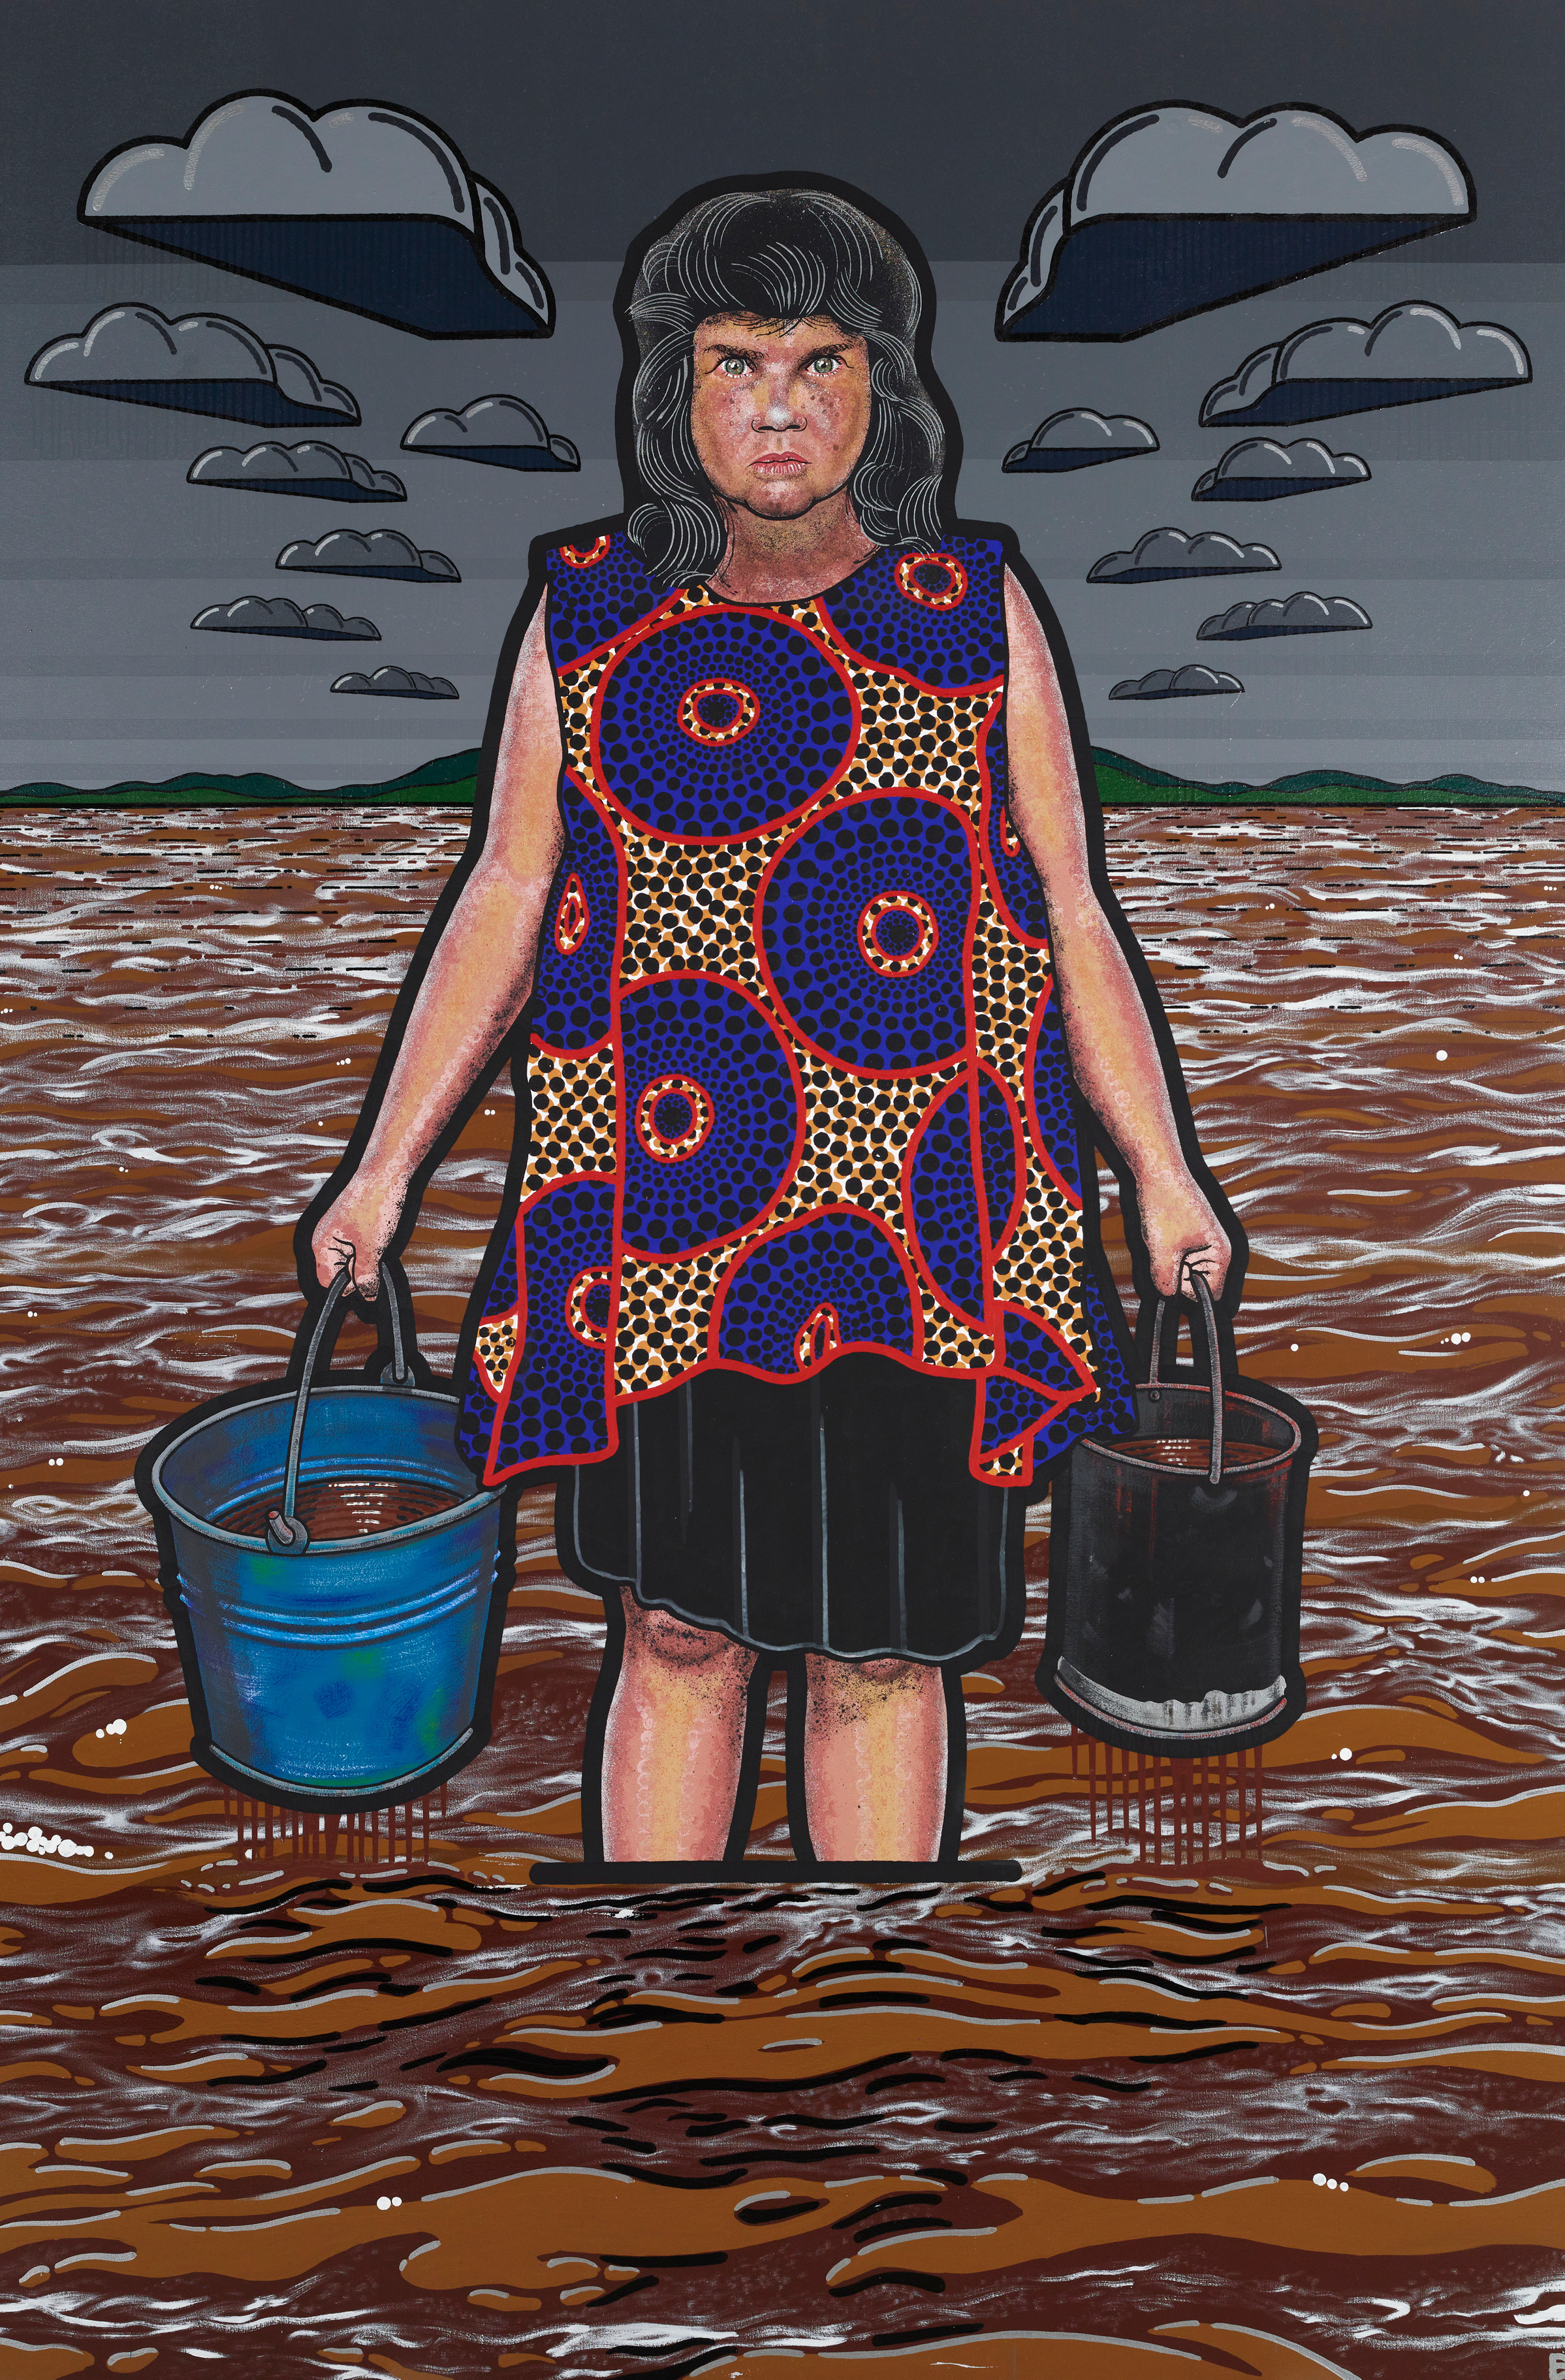 Portrait of an Indigenous woman wearing red and purple patterned dress, holding two buckets and standing in brown flood waters.